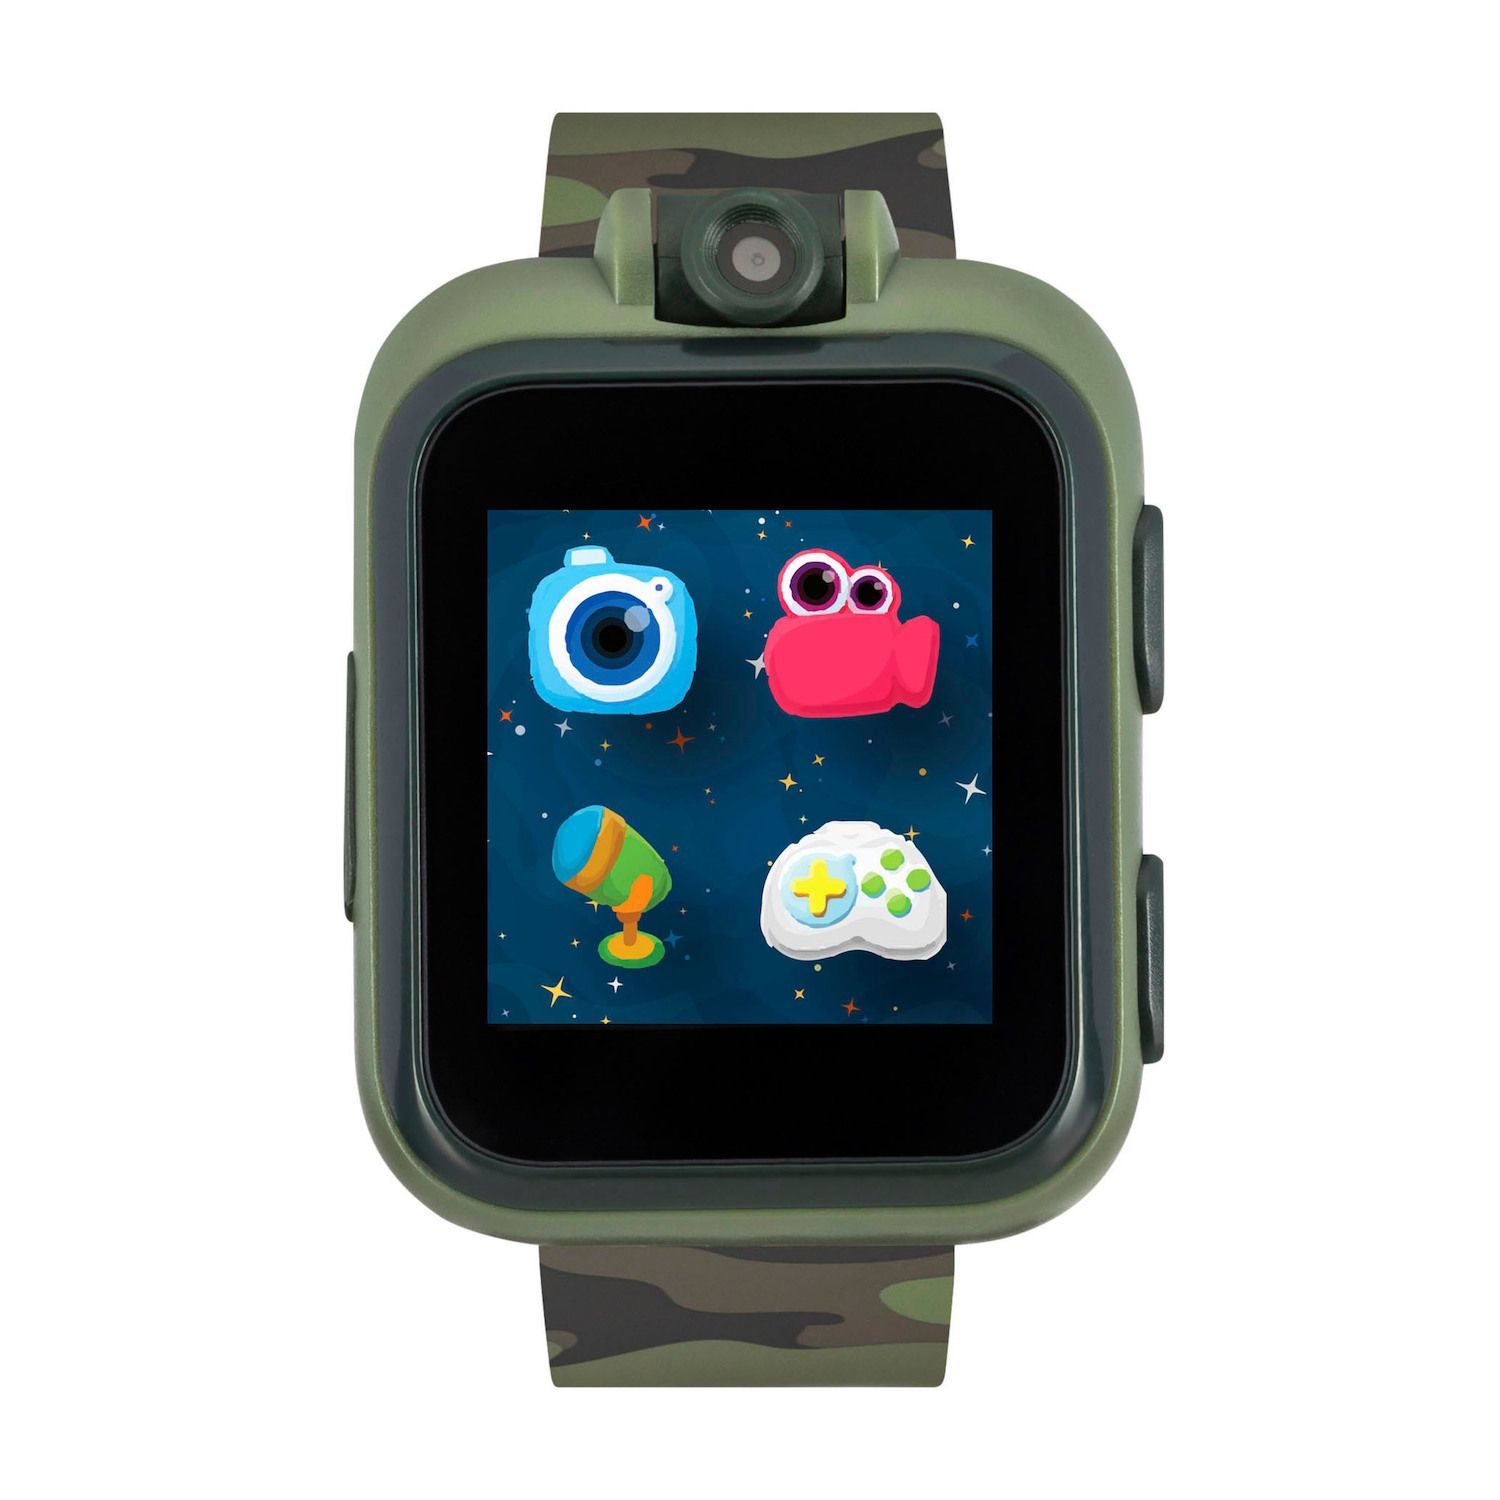 itouch kids watch